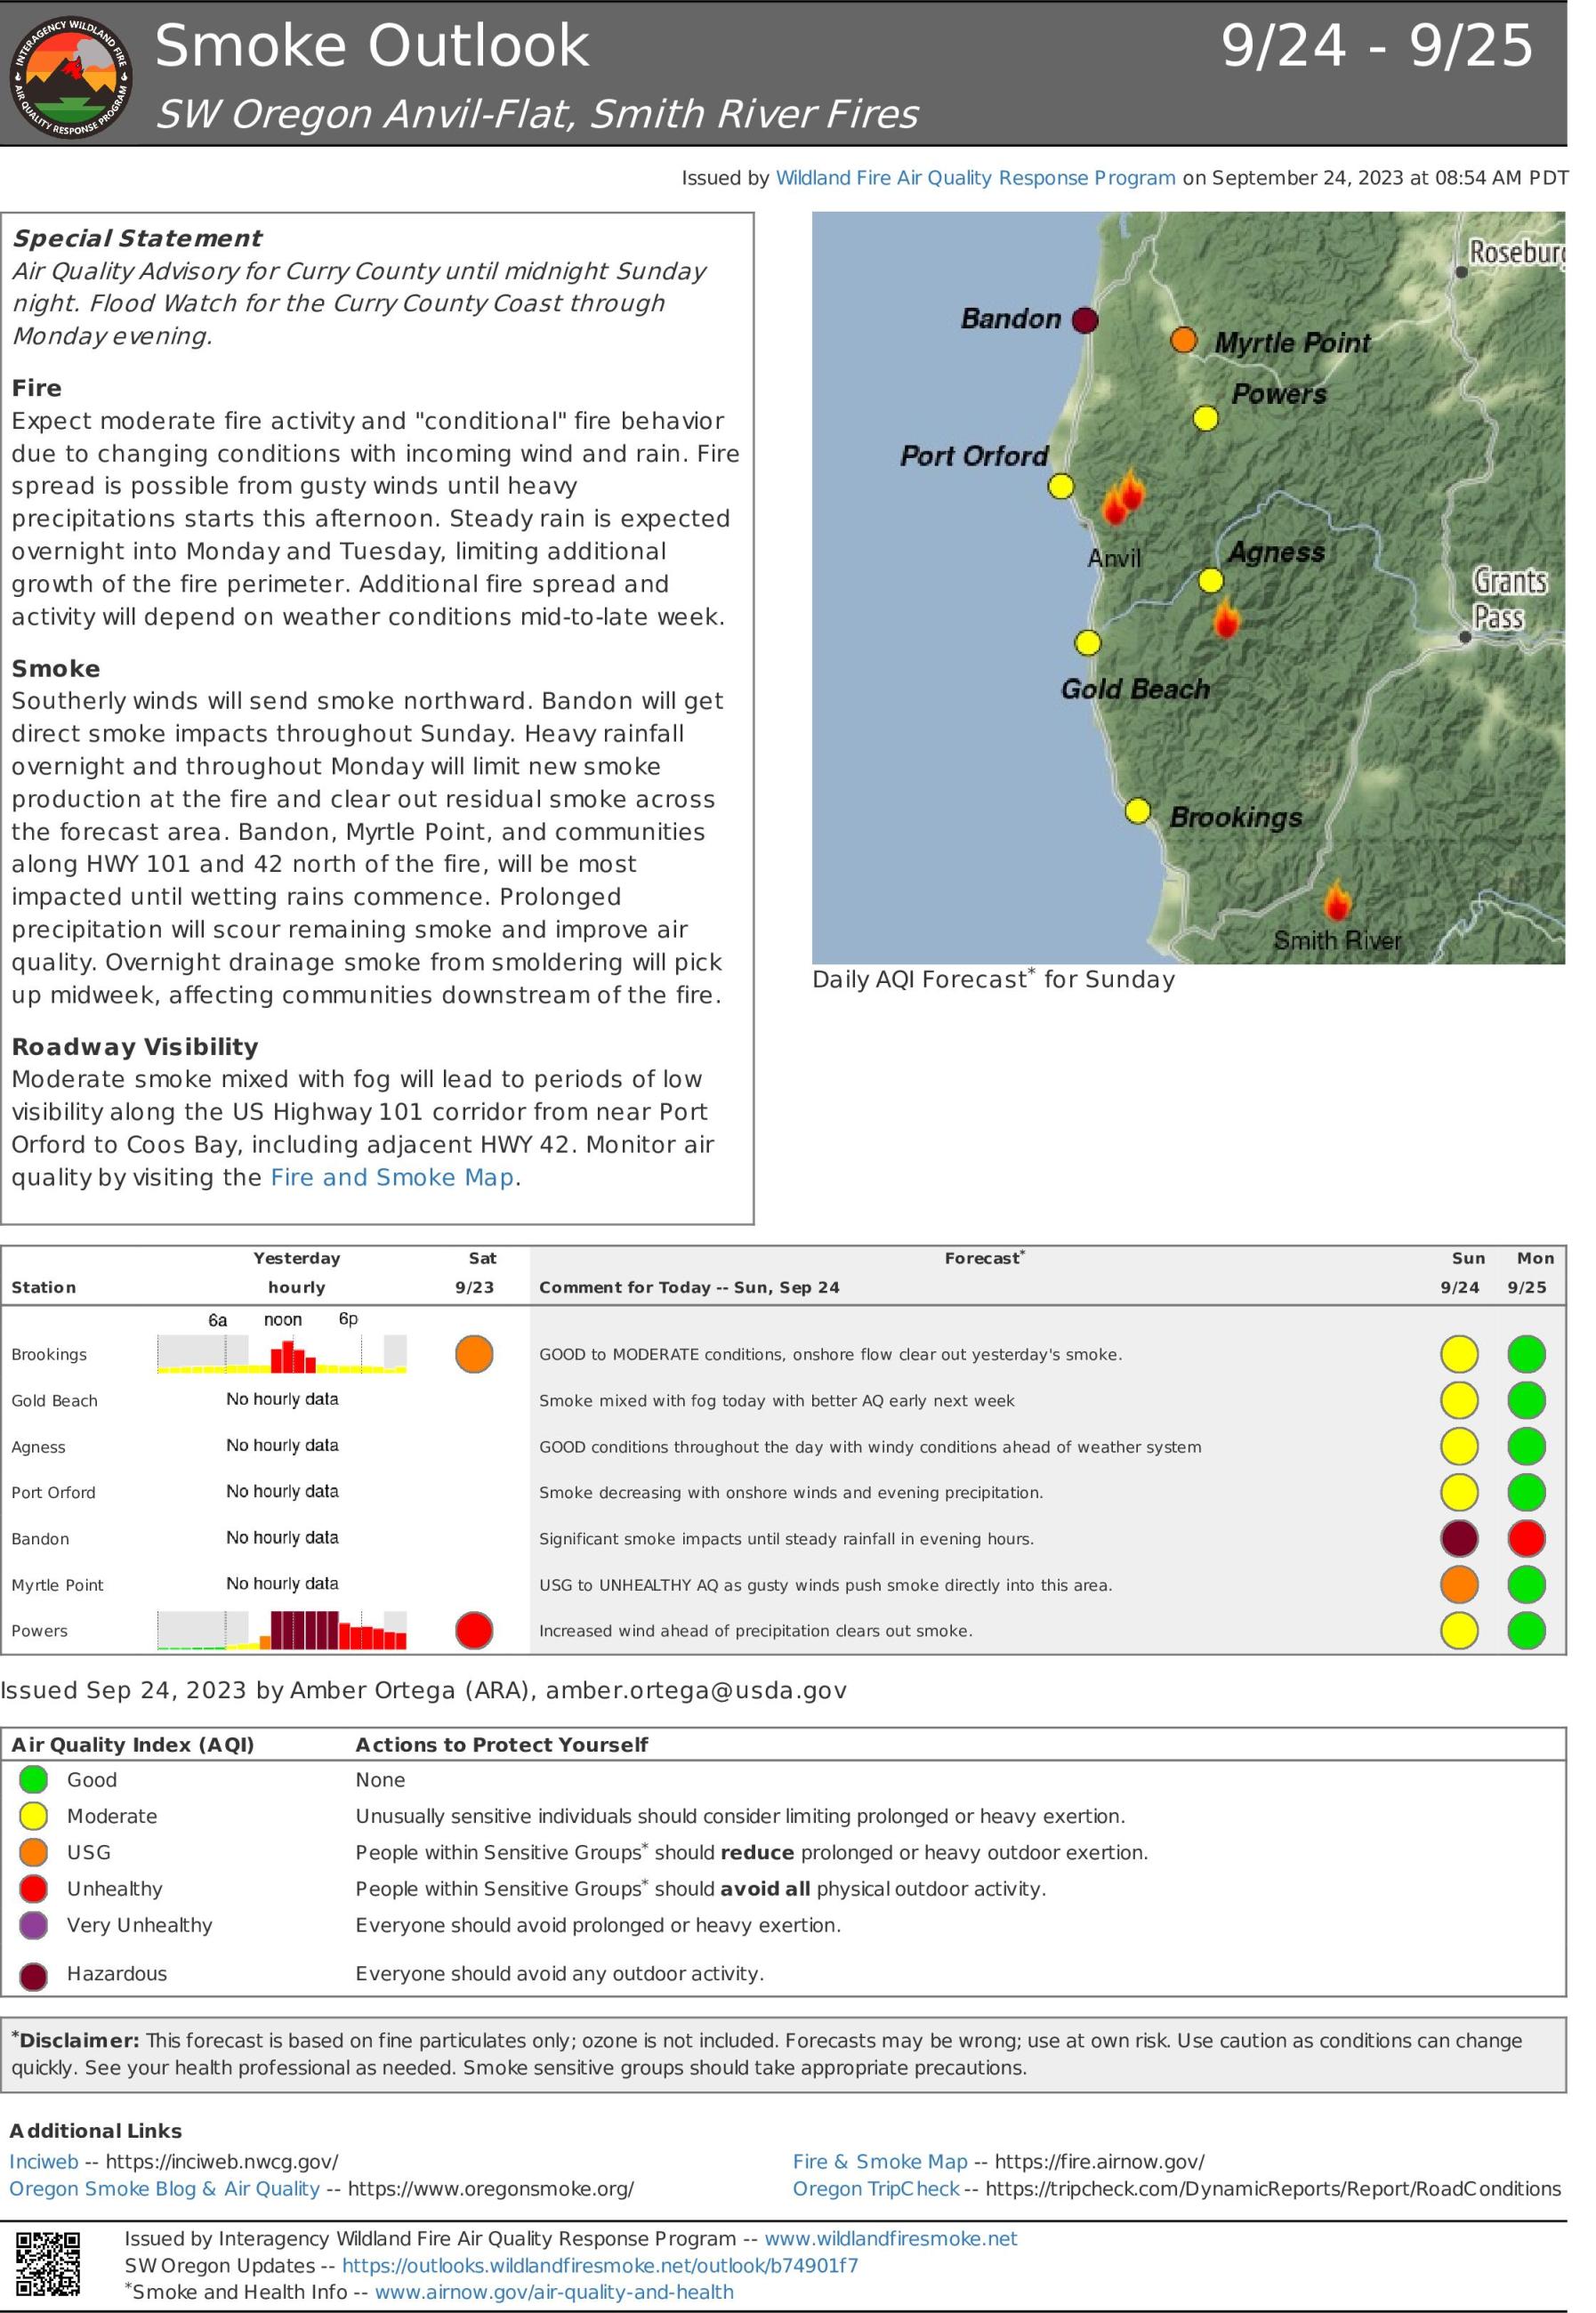 Smoke Outlook SW OR Anvil-Flat, Smith River Fires 9.24-9.25